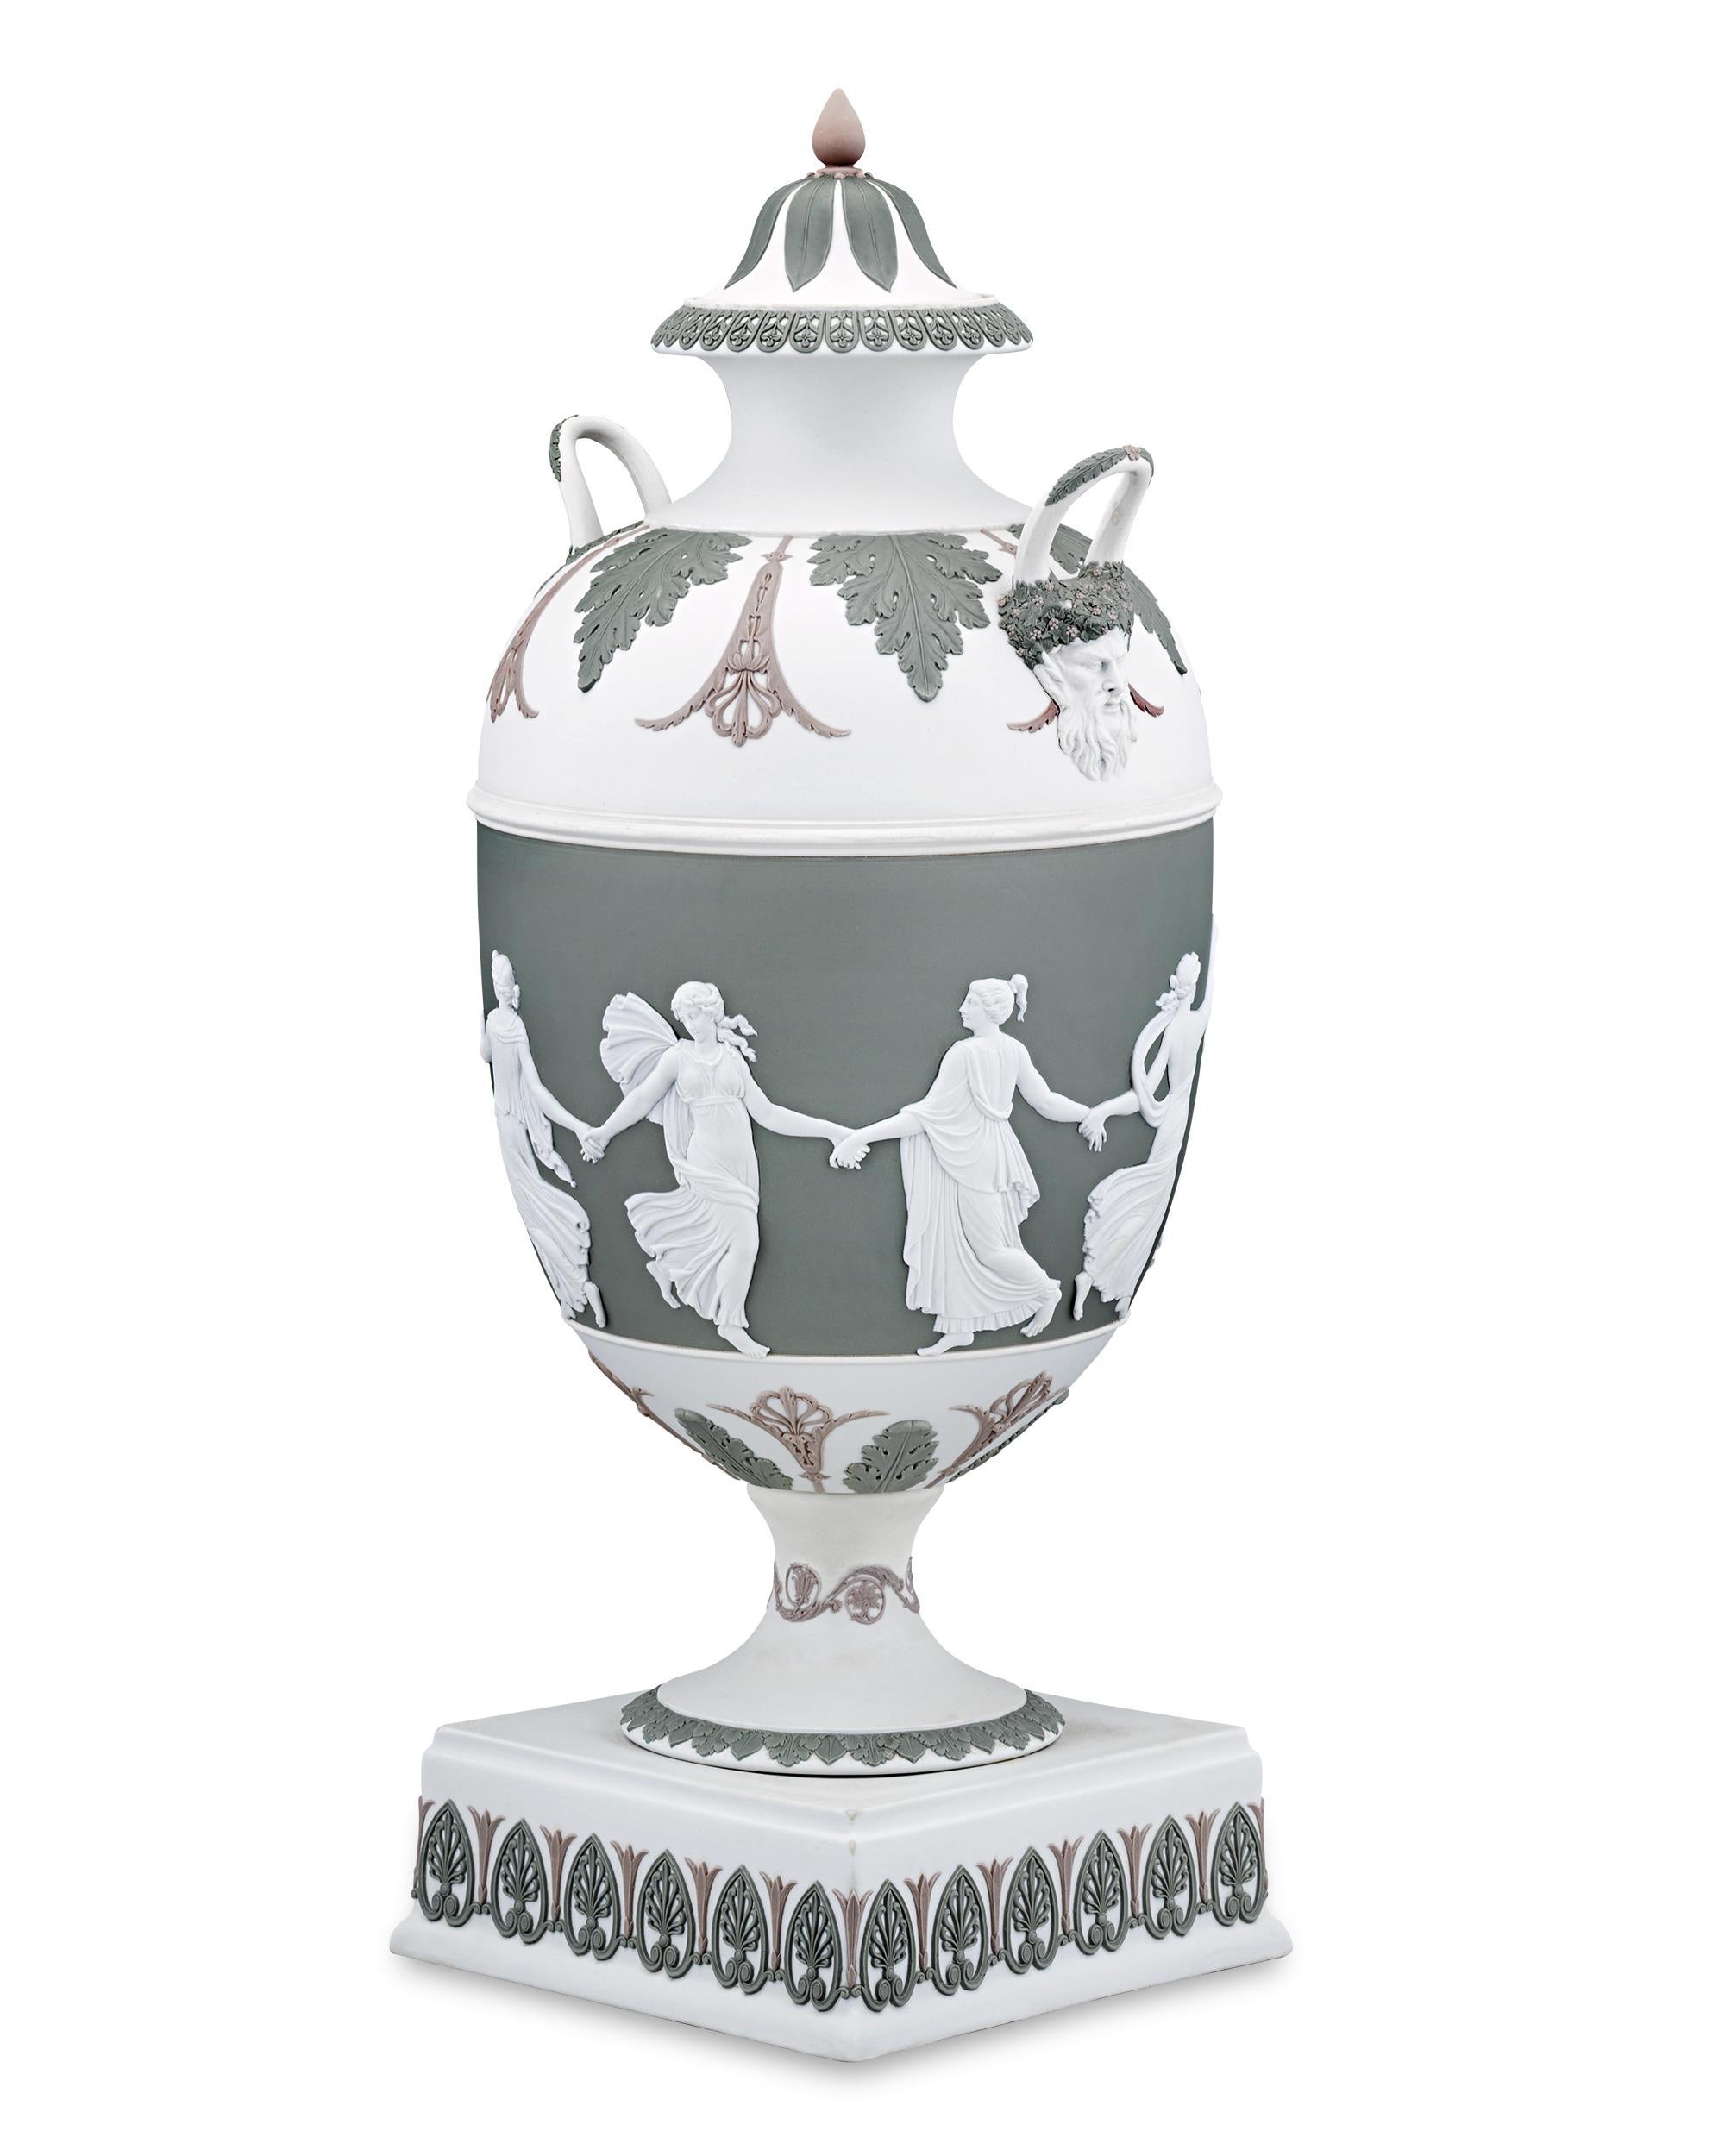 This impressive tricolor jasperware vase from Wedgwood was designed by celebrated English sculptor, illustrator and designer John Flaxman, Jr. who was considered a leading artist of the Neoclassical style in England. The design is both striking and